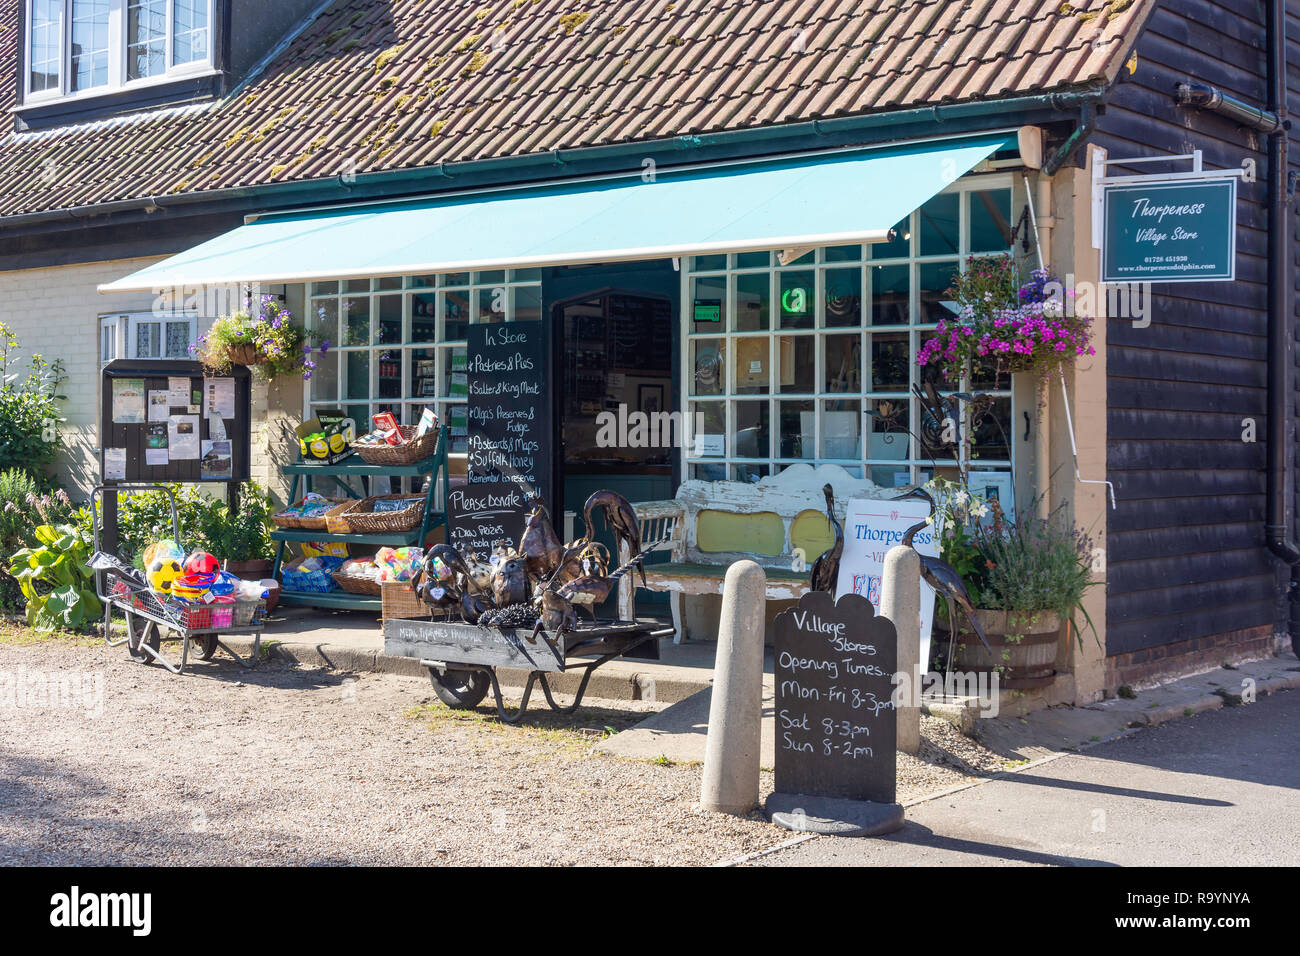 Outdoor display, Thorpeness Village Store, Old Holmes Road, Thorpeness, Suffolk, England, United Kingdom Stock Photo